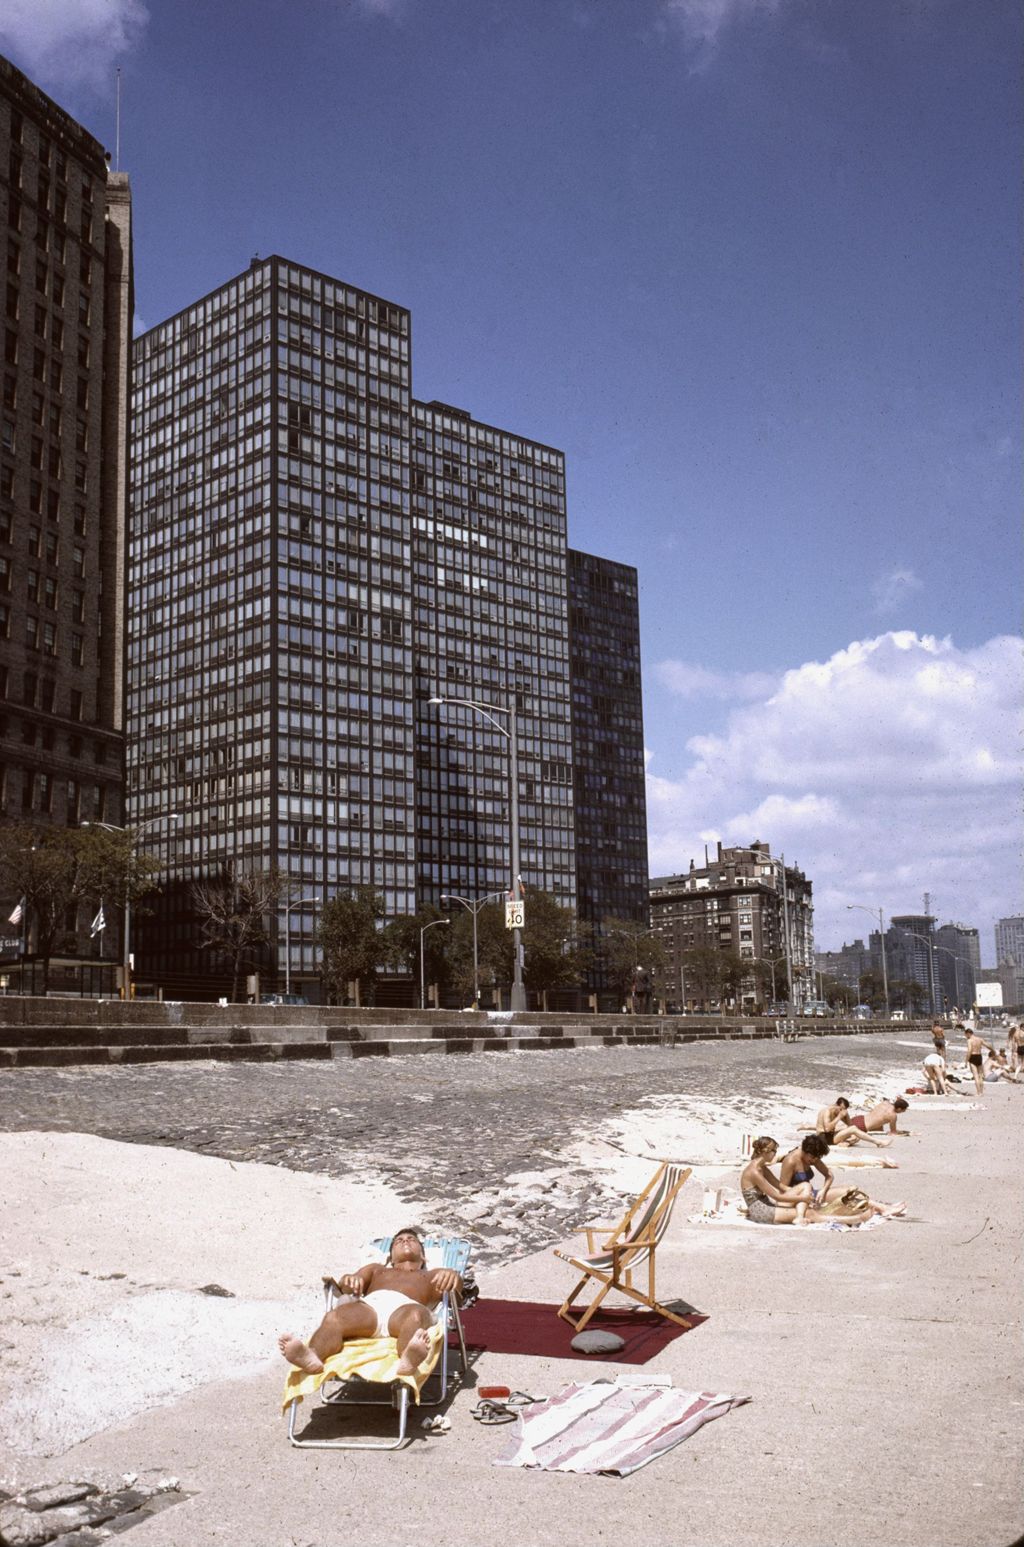 Miniature of 860-880 N. Lake Shore Drive apartments from the beach